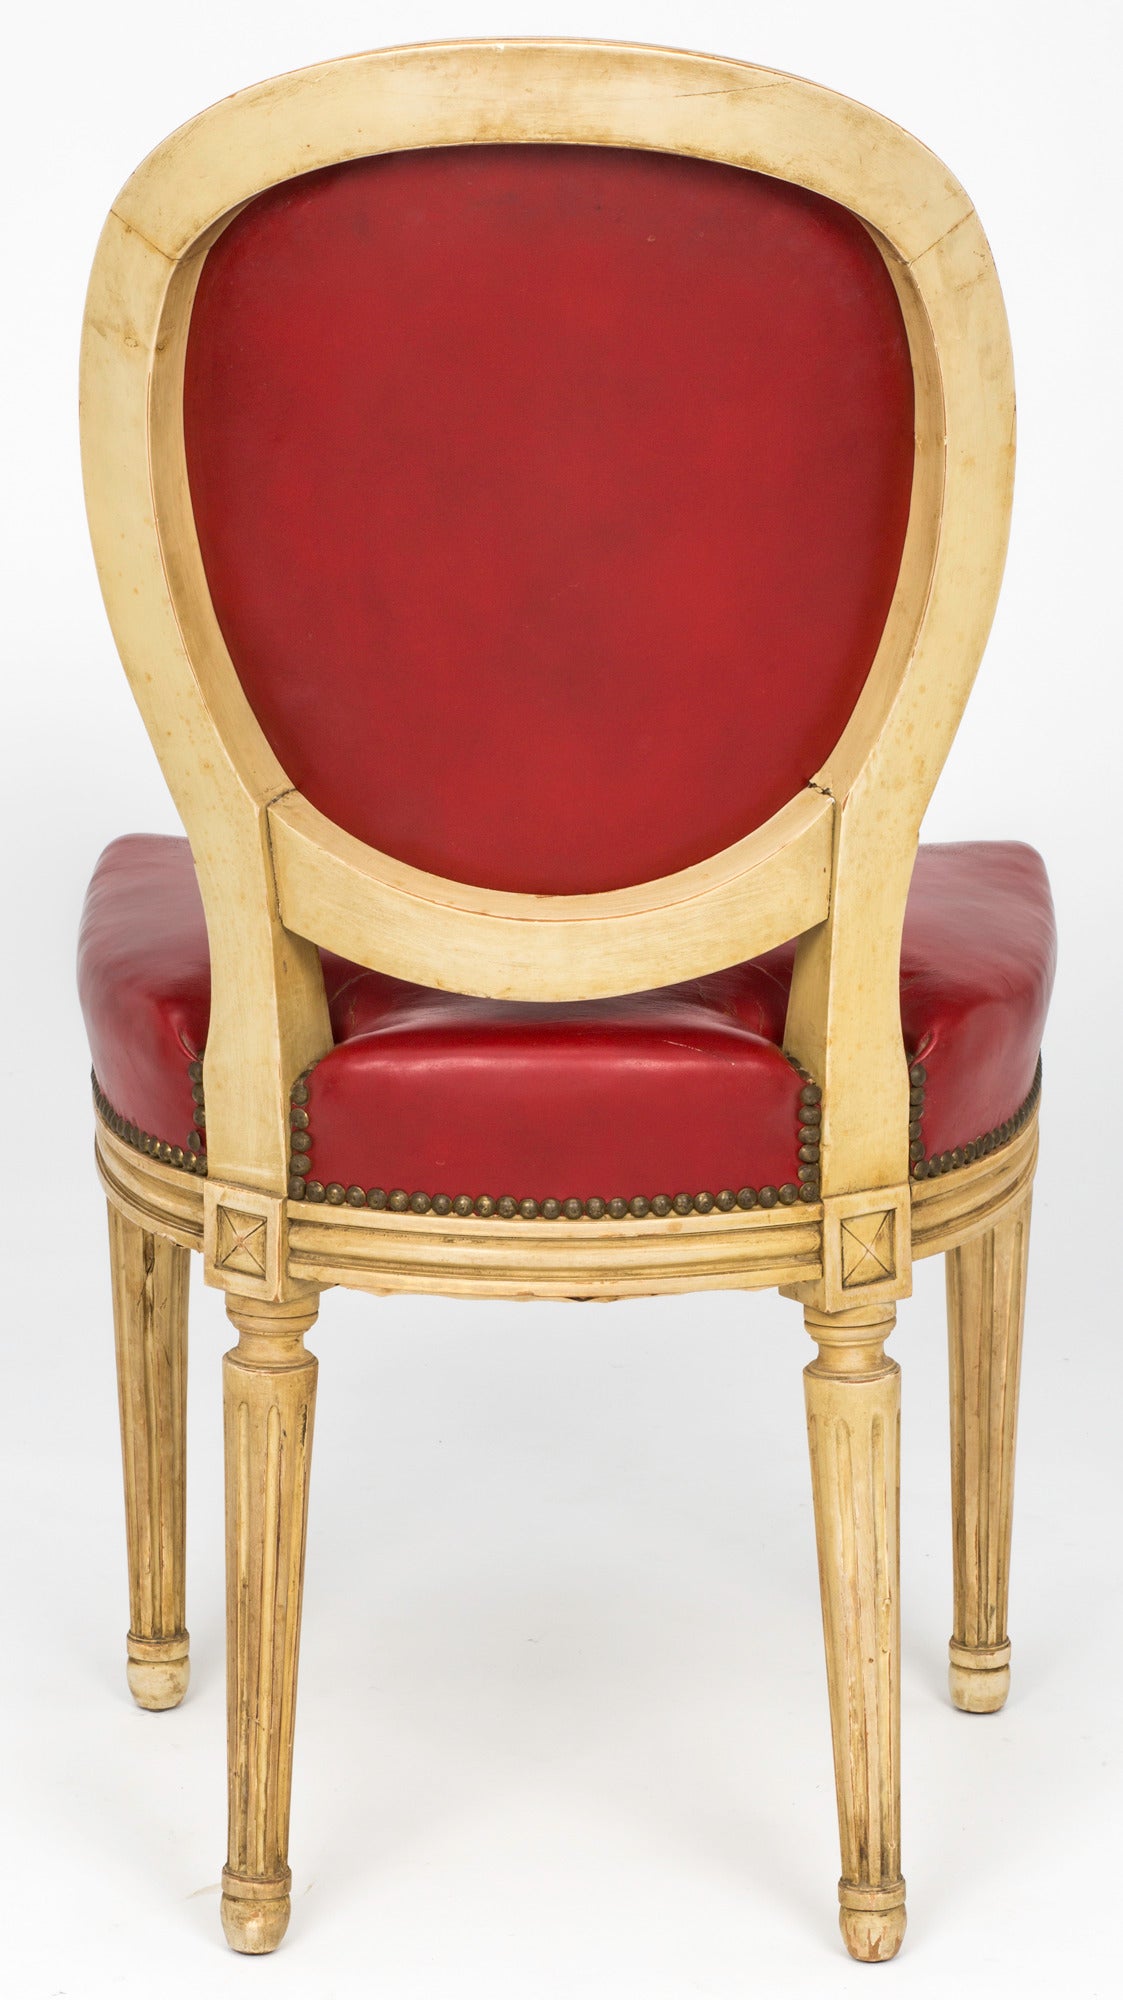 Pair of French Louis XVI Style Red Leather Chairs, 19th Century For Sale 1